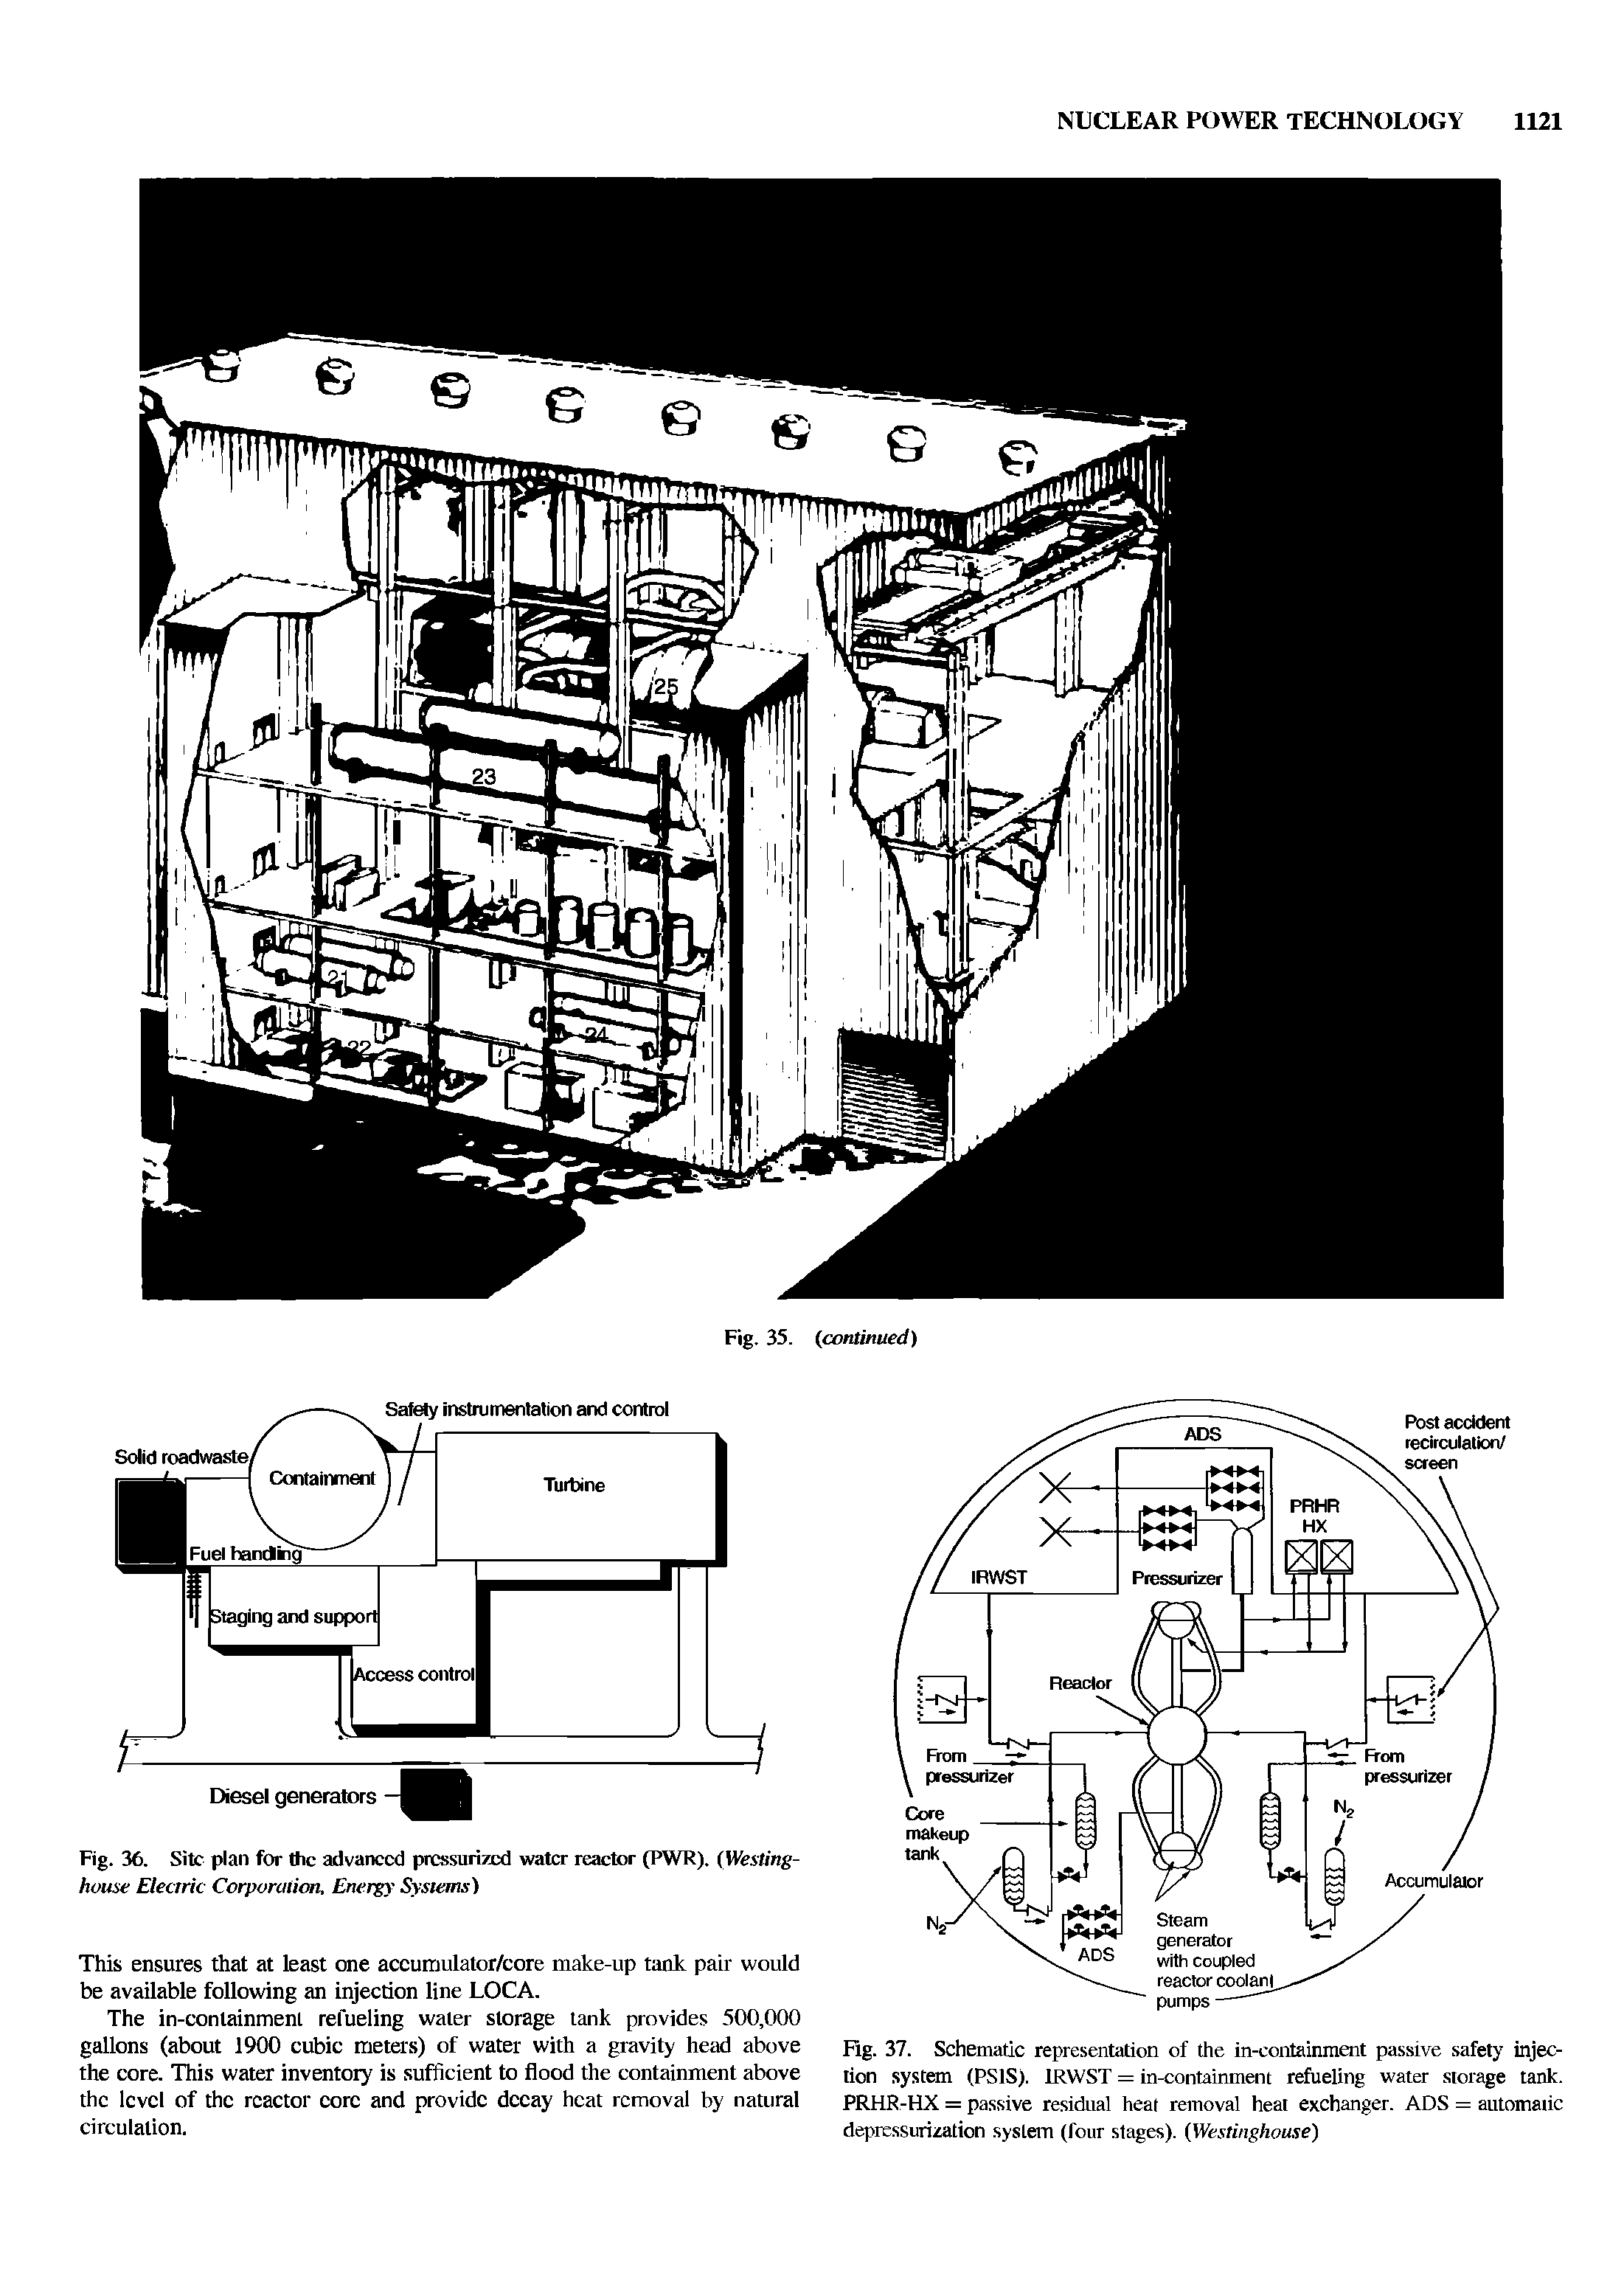 Fig. 36. Site plan for the advanced pressurized water reactor (PWR). (Westing-house Electric Corporation, Energy Systems)...